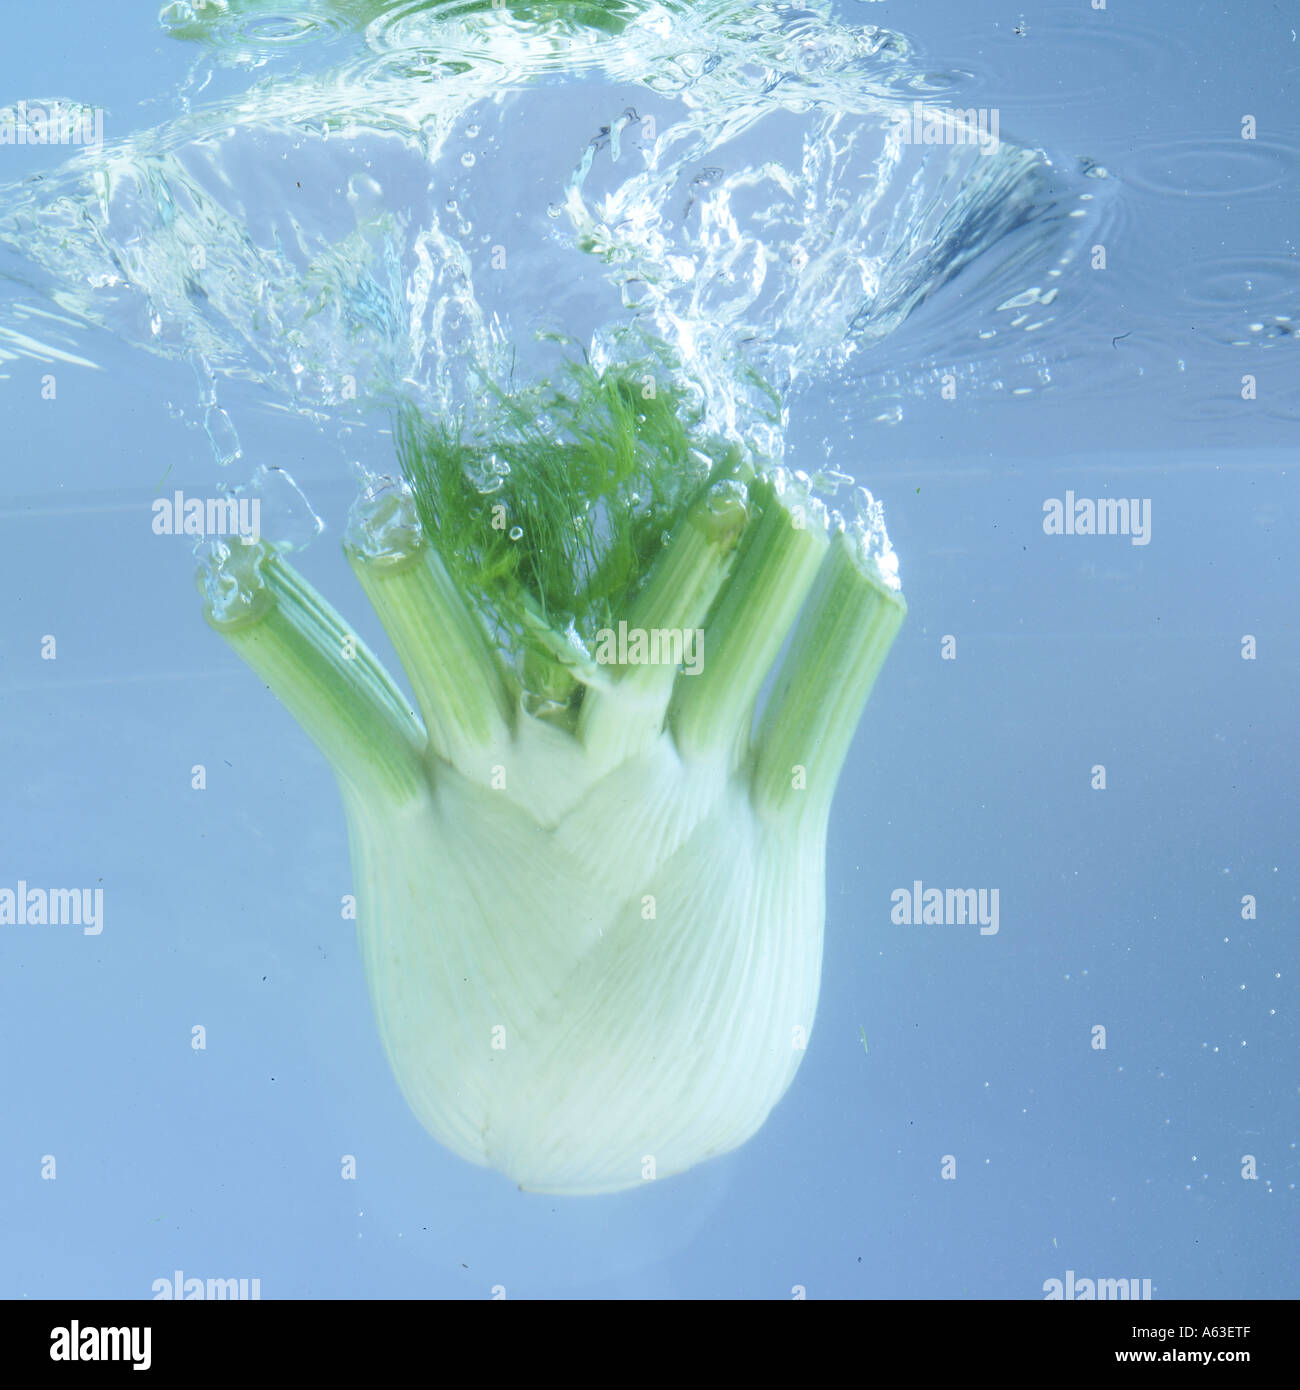 Close-up of fennel splashing in water Stock Photo